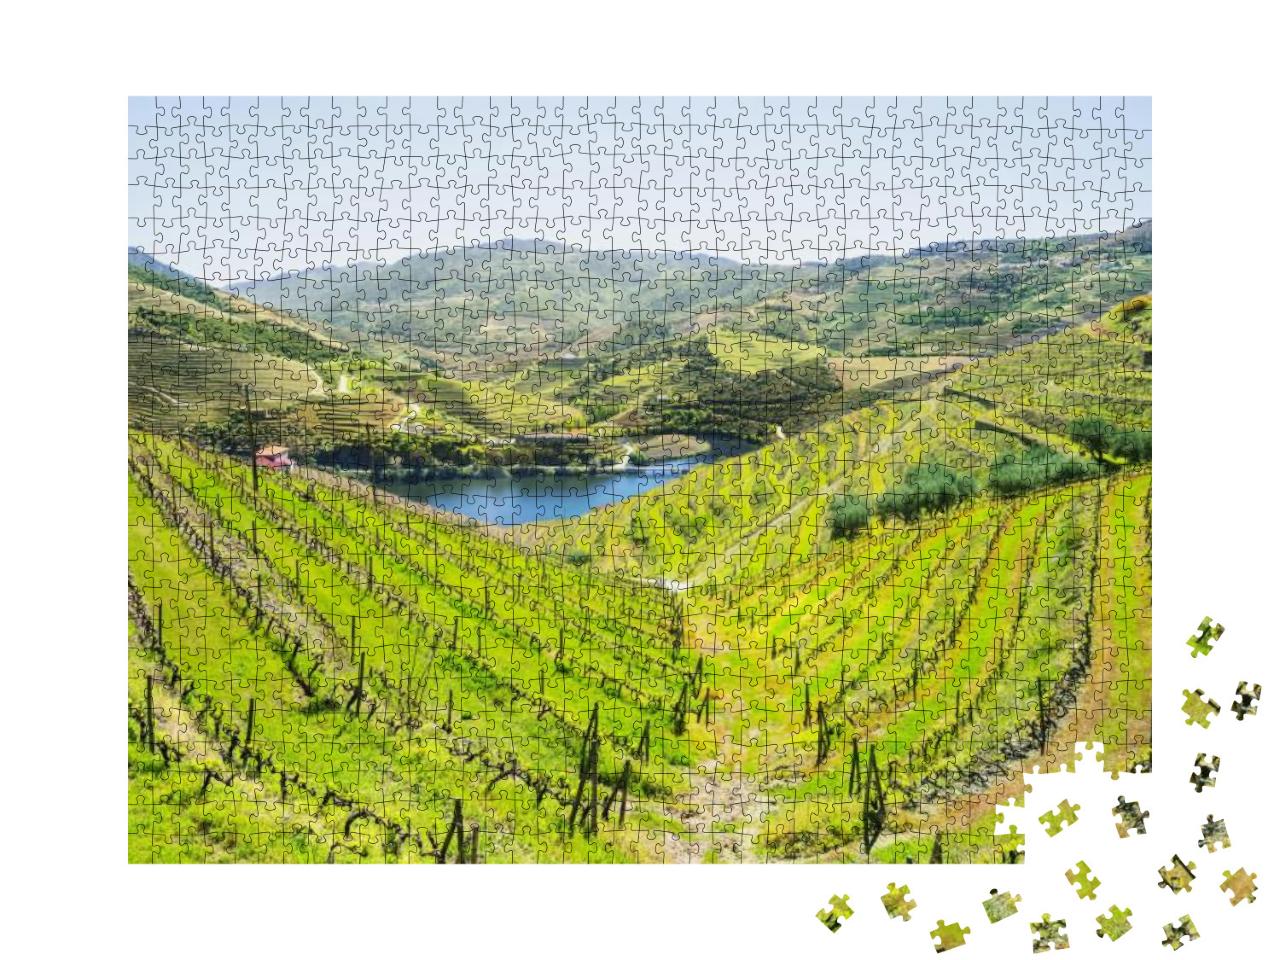 Douro Valley. Vineyards & Landscape Near Pinhao, Portugal... Jigsaw Puzzle with 1000 pieces